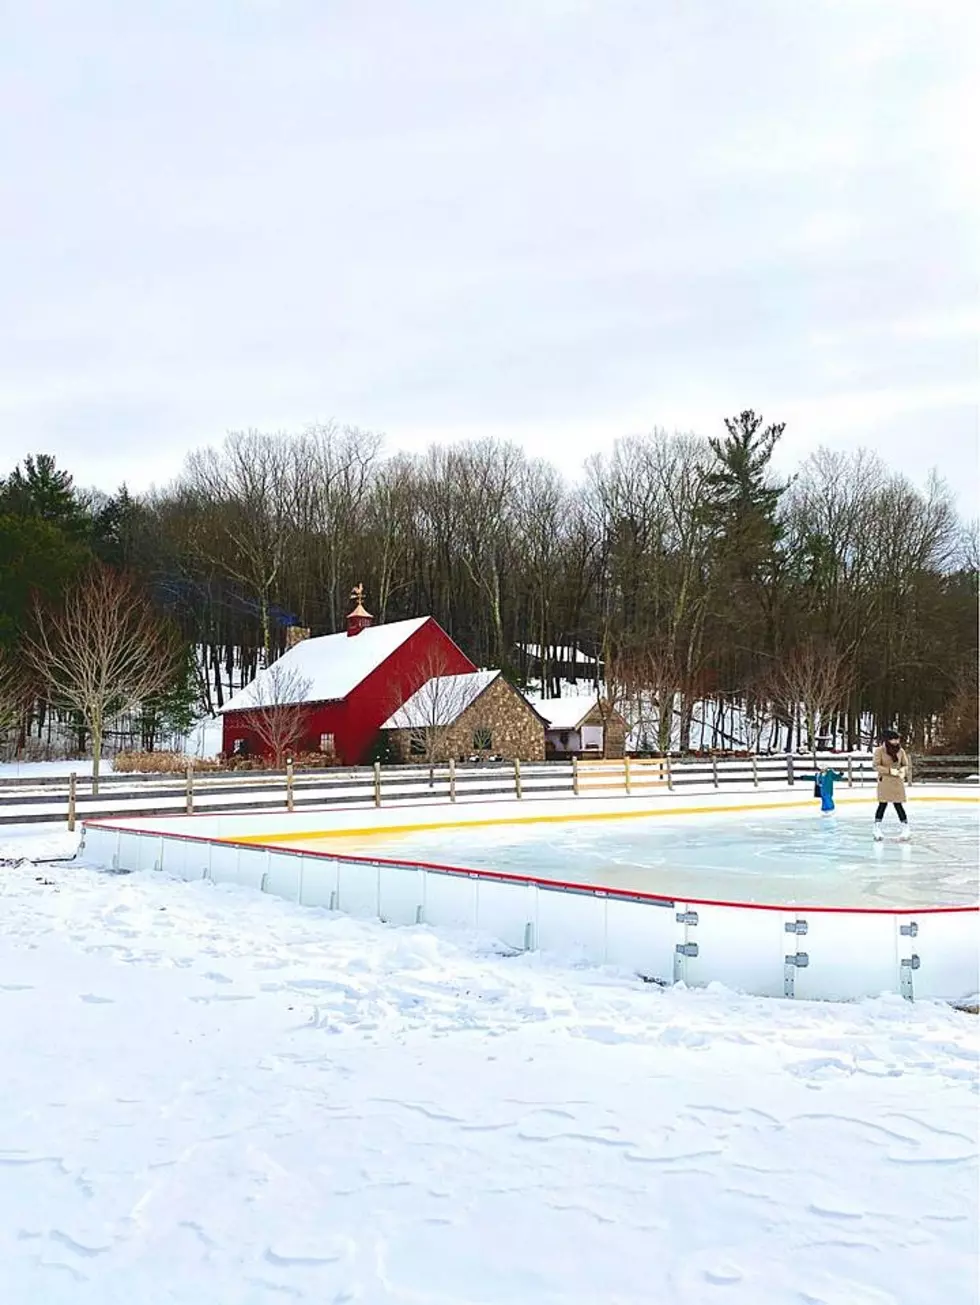 Wanna Buy an Ice Skating Rink? June Farms is Selling One